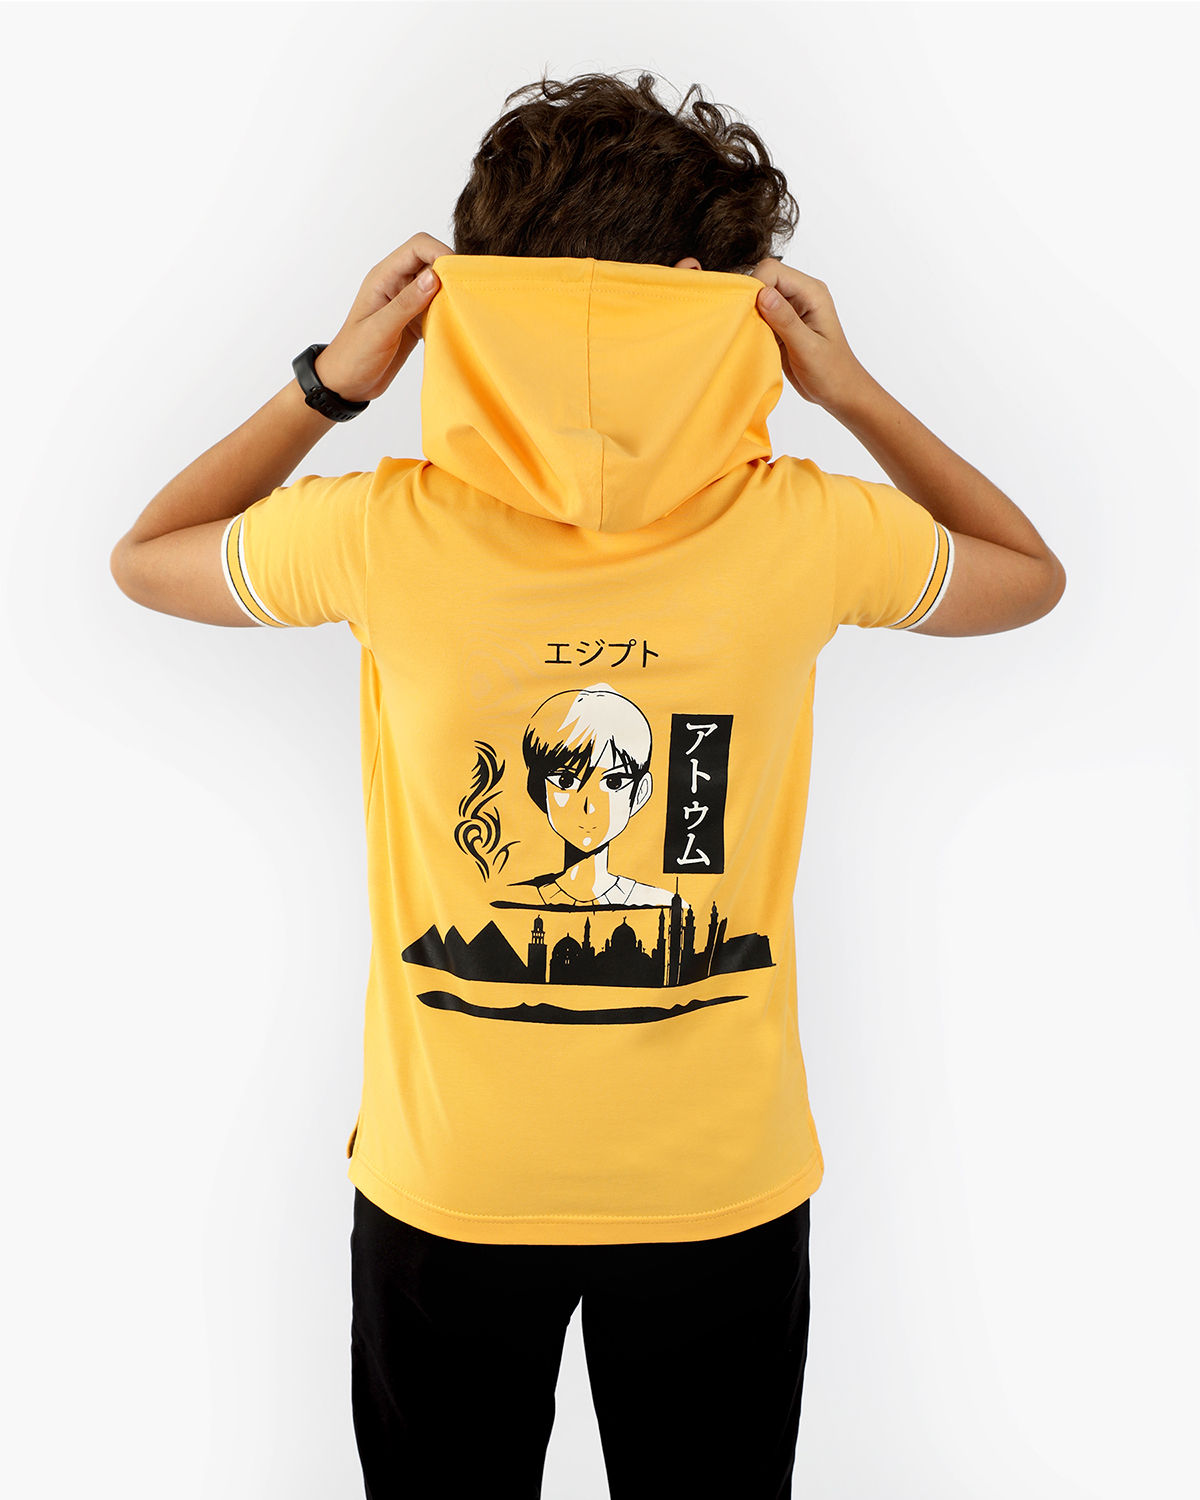 Photo by 𝗔𝗧𝗨𝗠 SPORTSWEAR ® on December 20, 2022. May be an image of 1 boy wears a yellow t-shirt and a text said '' Atum''.